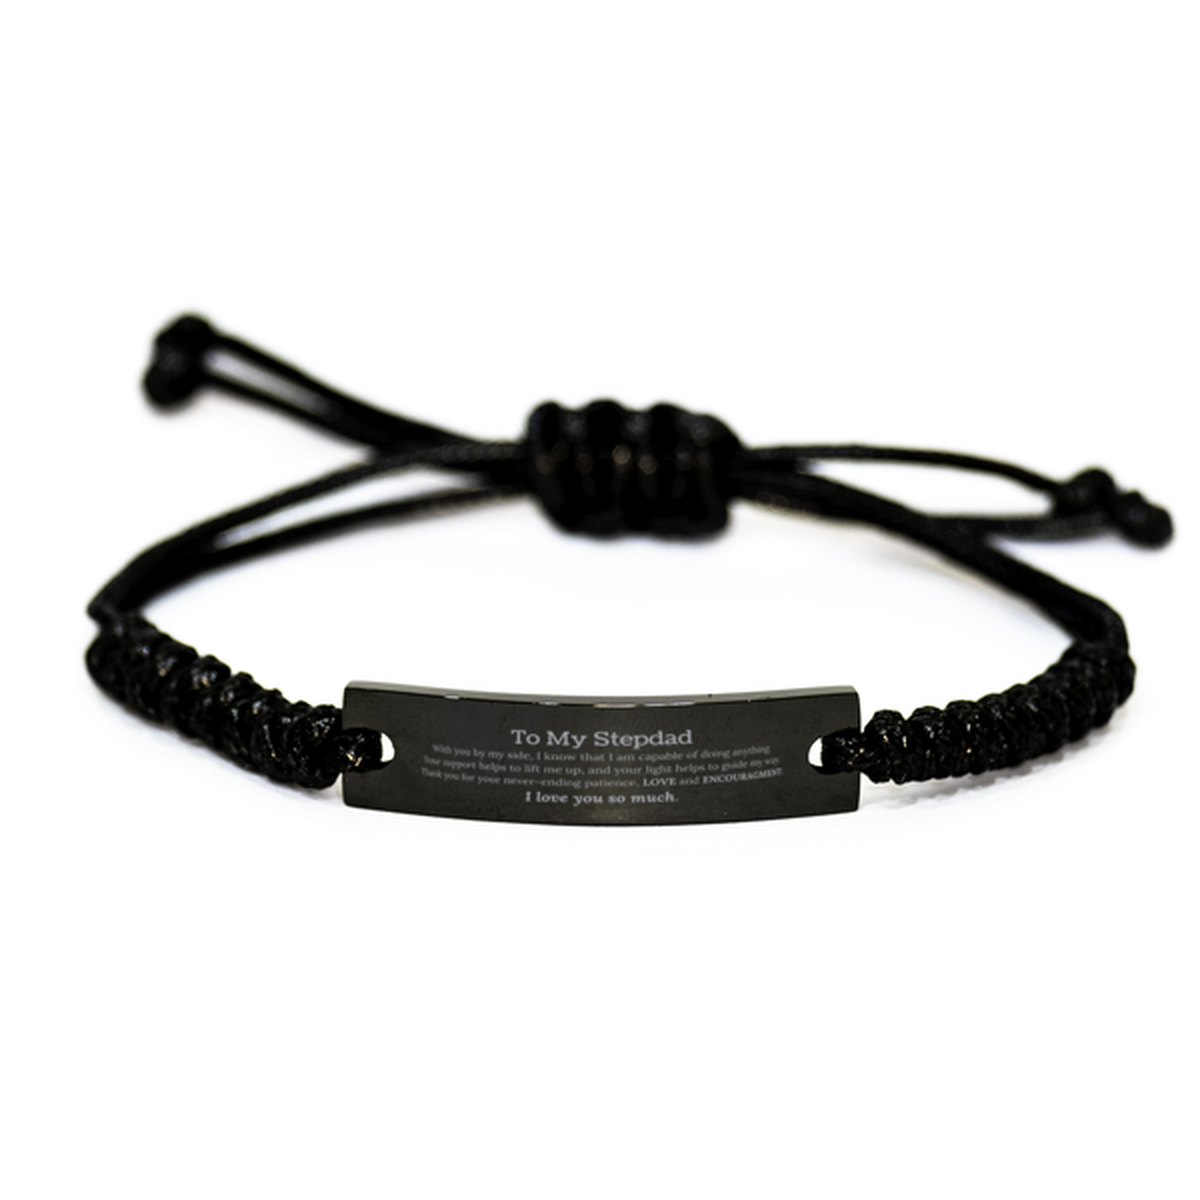 Appreciation Stepdad Black Rope Bracelet Gifts, To My Stepdad Birthday Christmas Wedding Keepsake Gifts for Stepdad With you by my side, I know that I am capable of doing anything. I love you so much